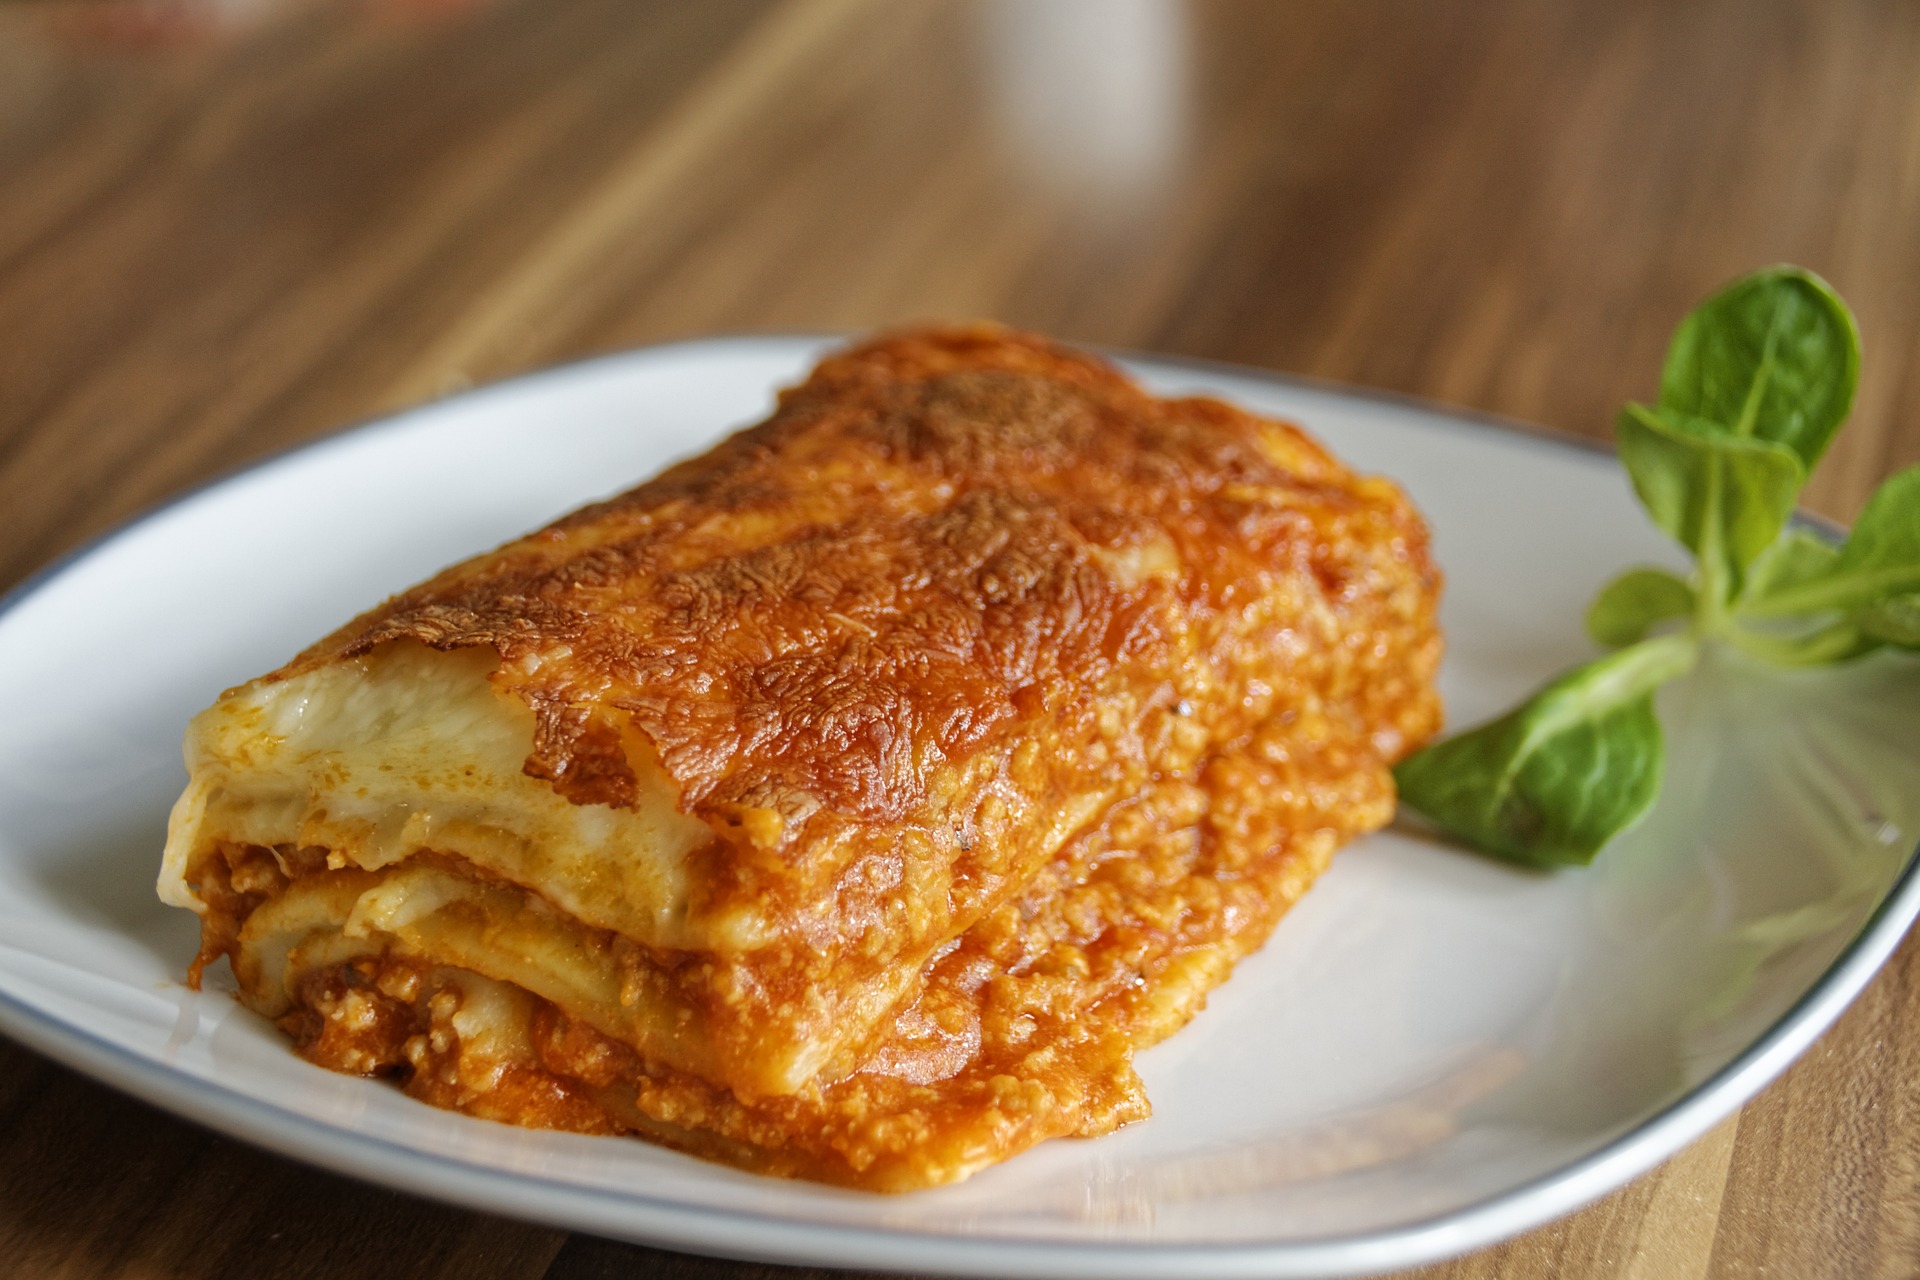 How to cook frozen lasagna faster